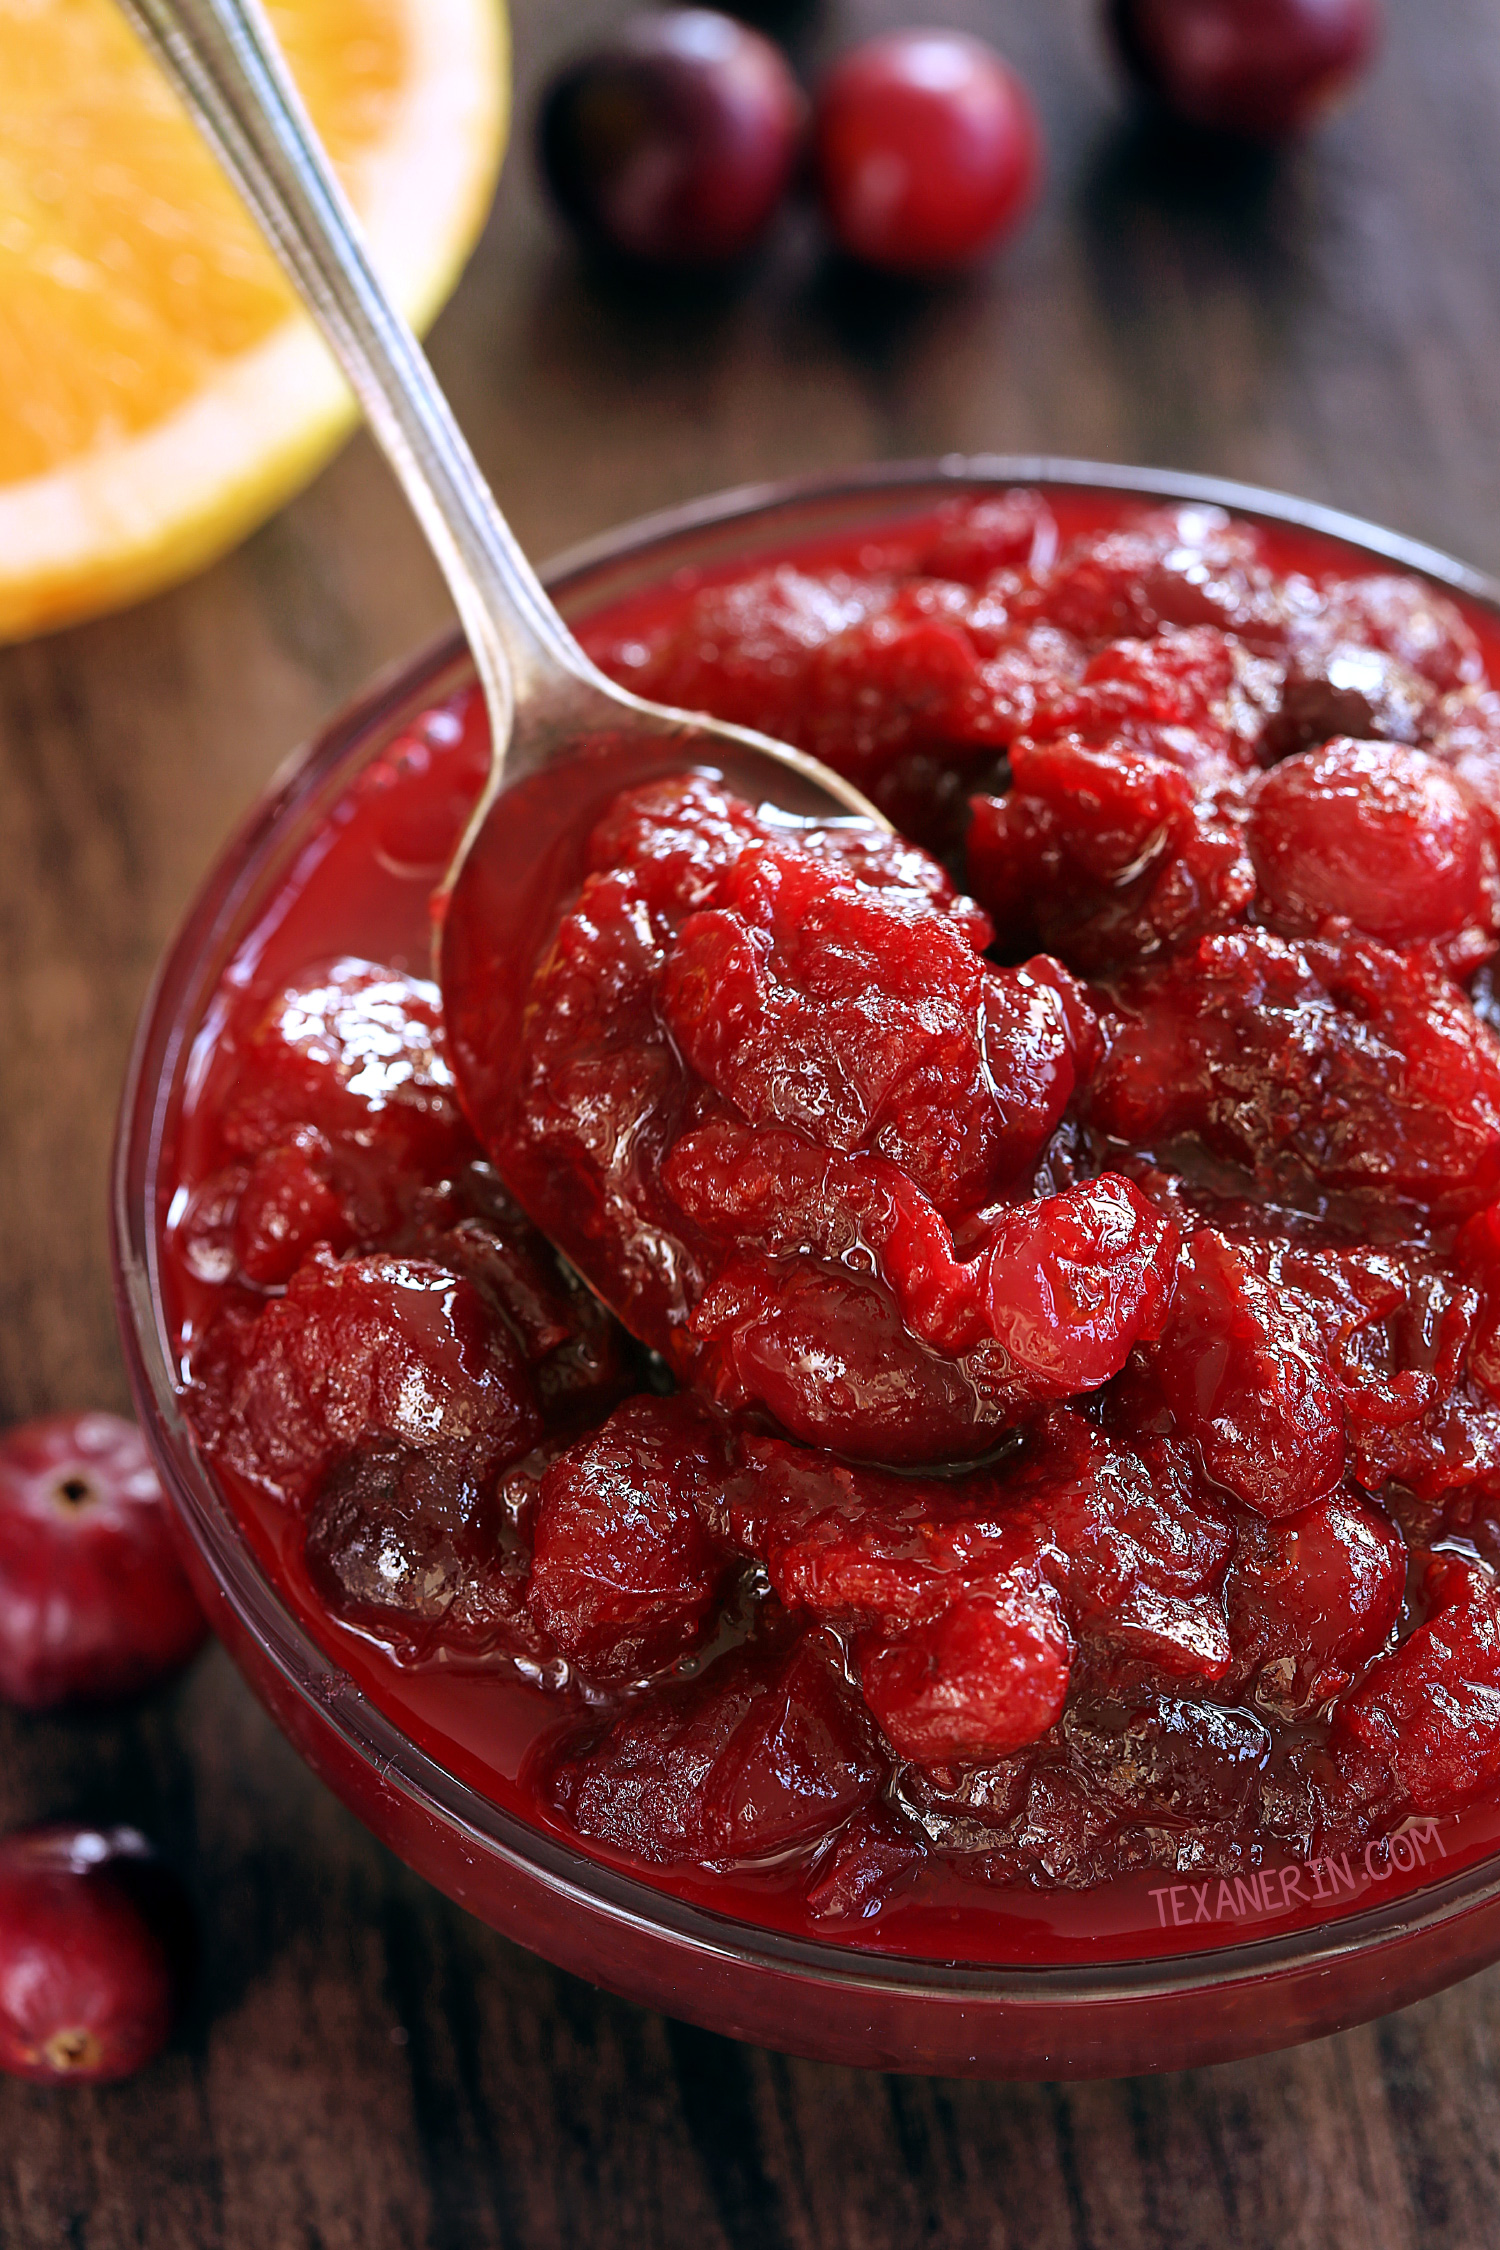 How to Make Cranberry Sauce - Texanerin Baking